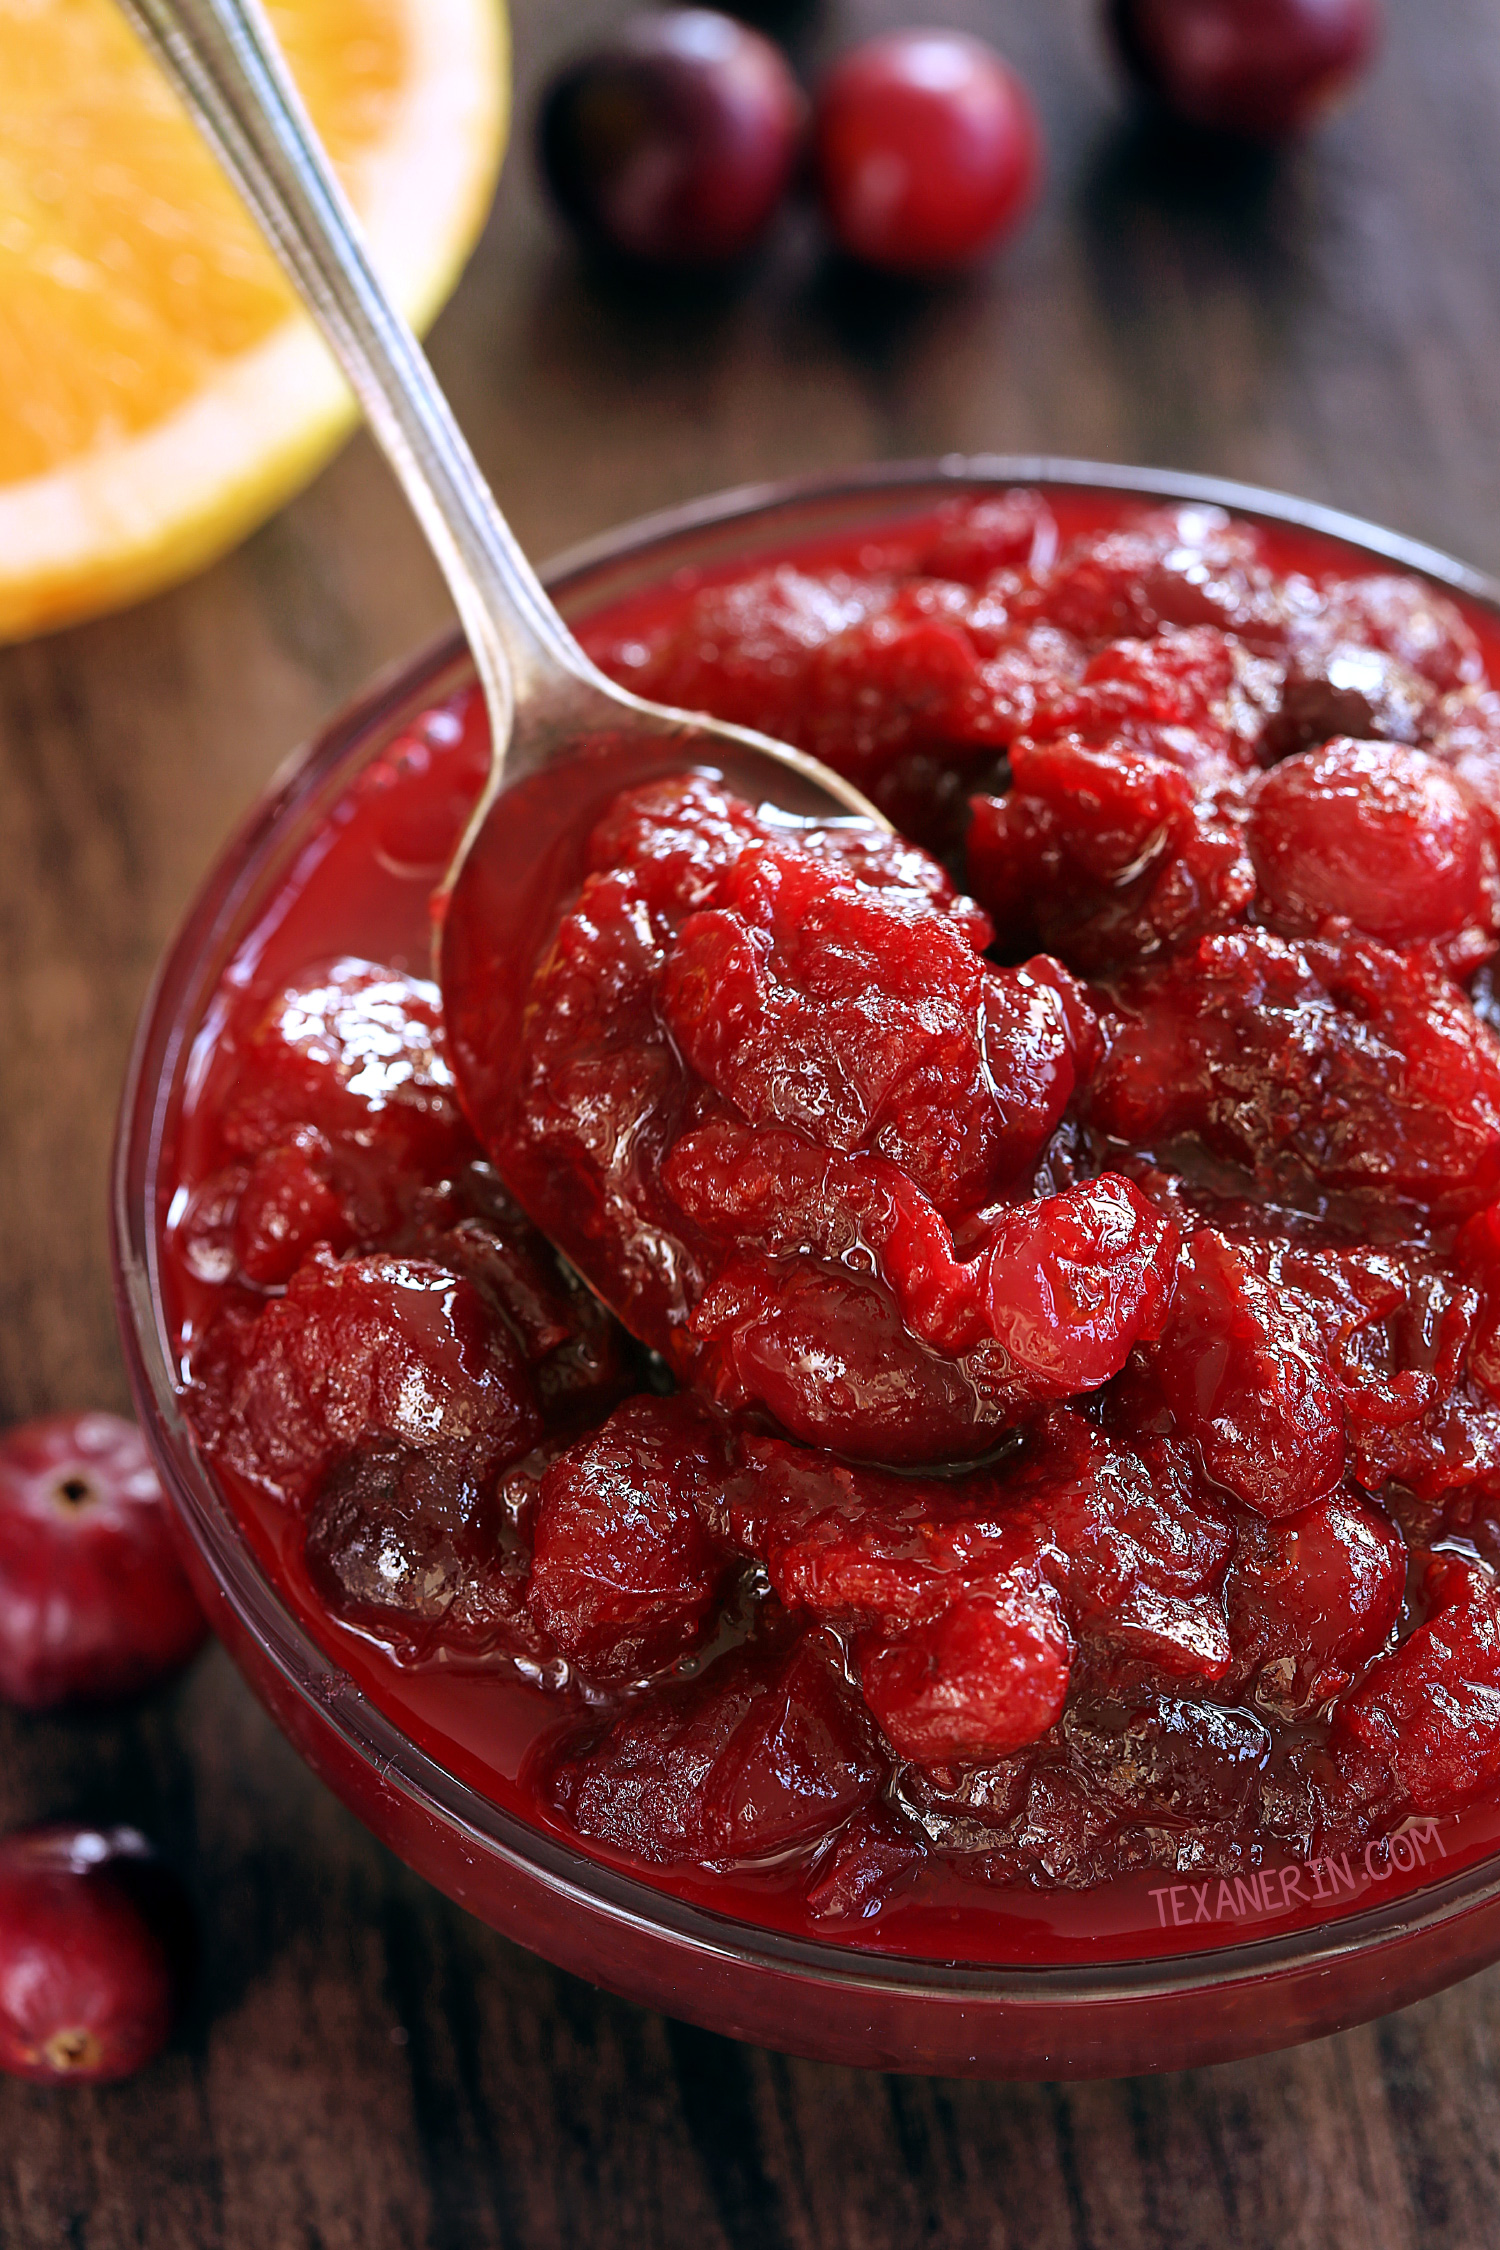 How to Make Cranberry Sauce - Texanerin Baking